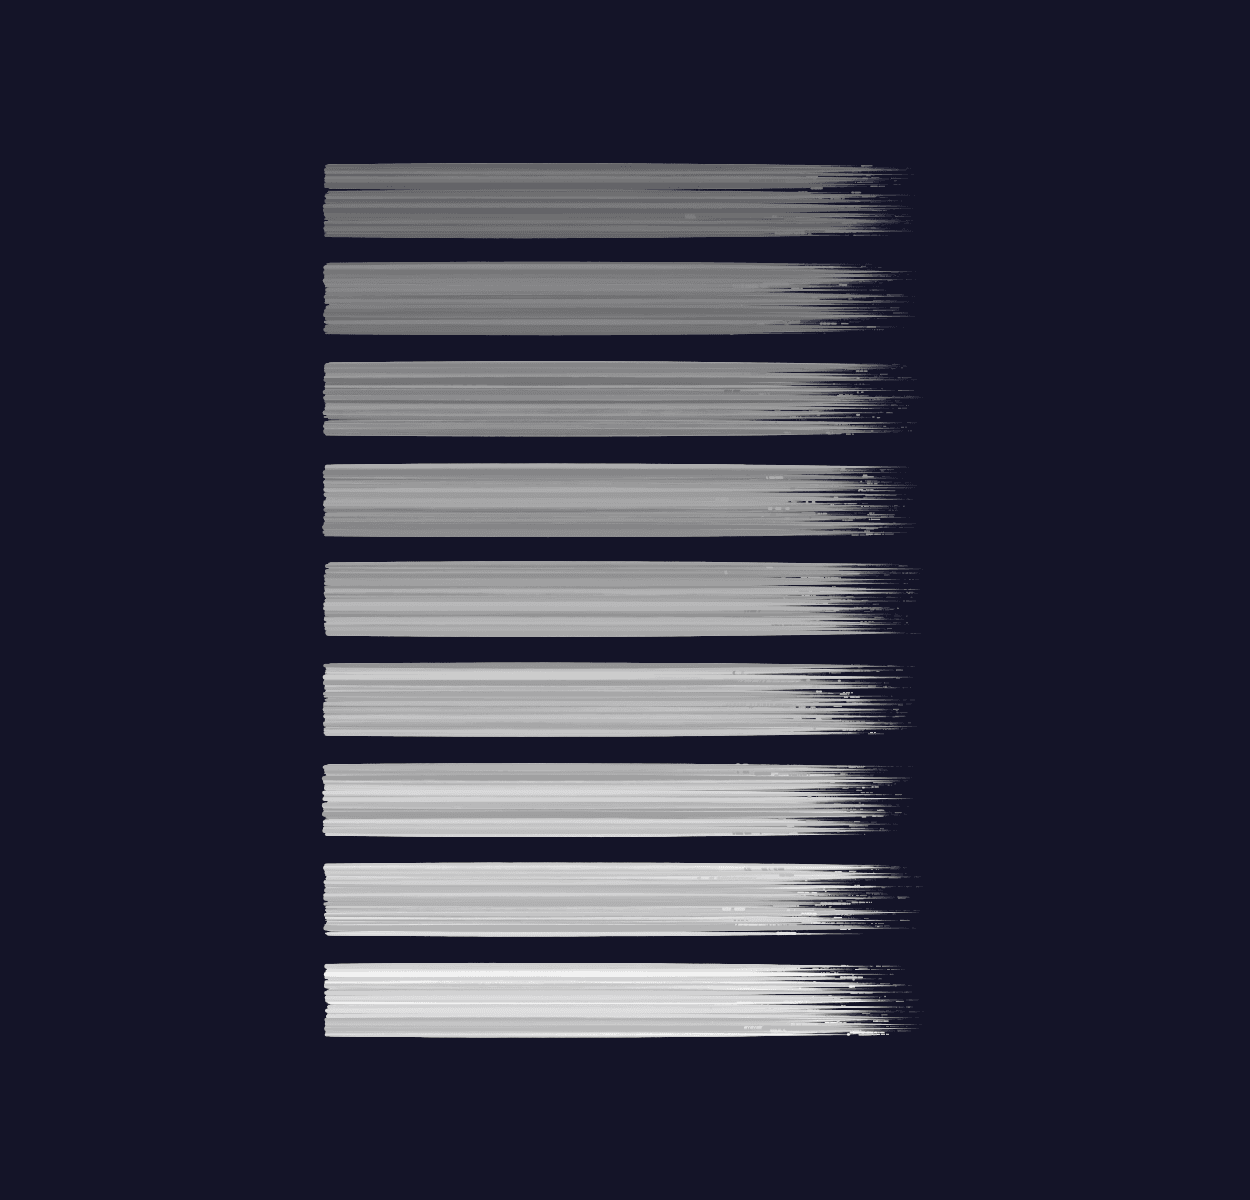 Nine individual horizontal brush strokes from grey to white on a black background